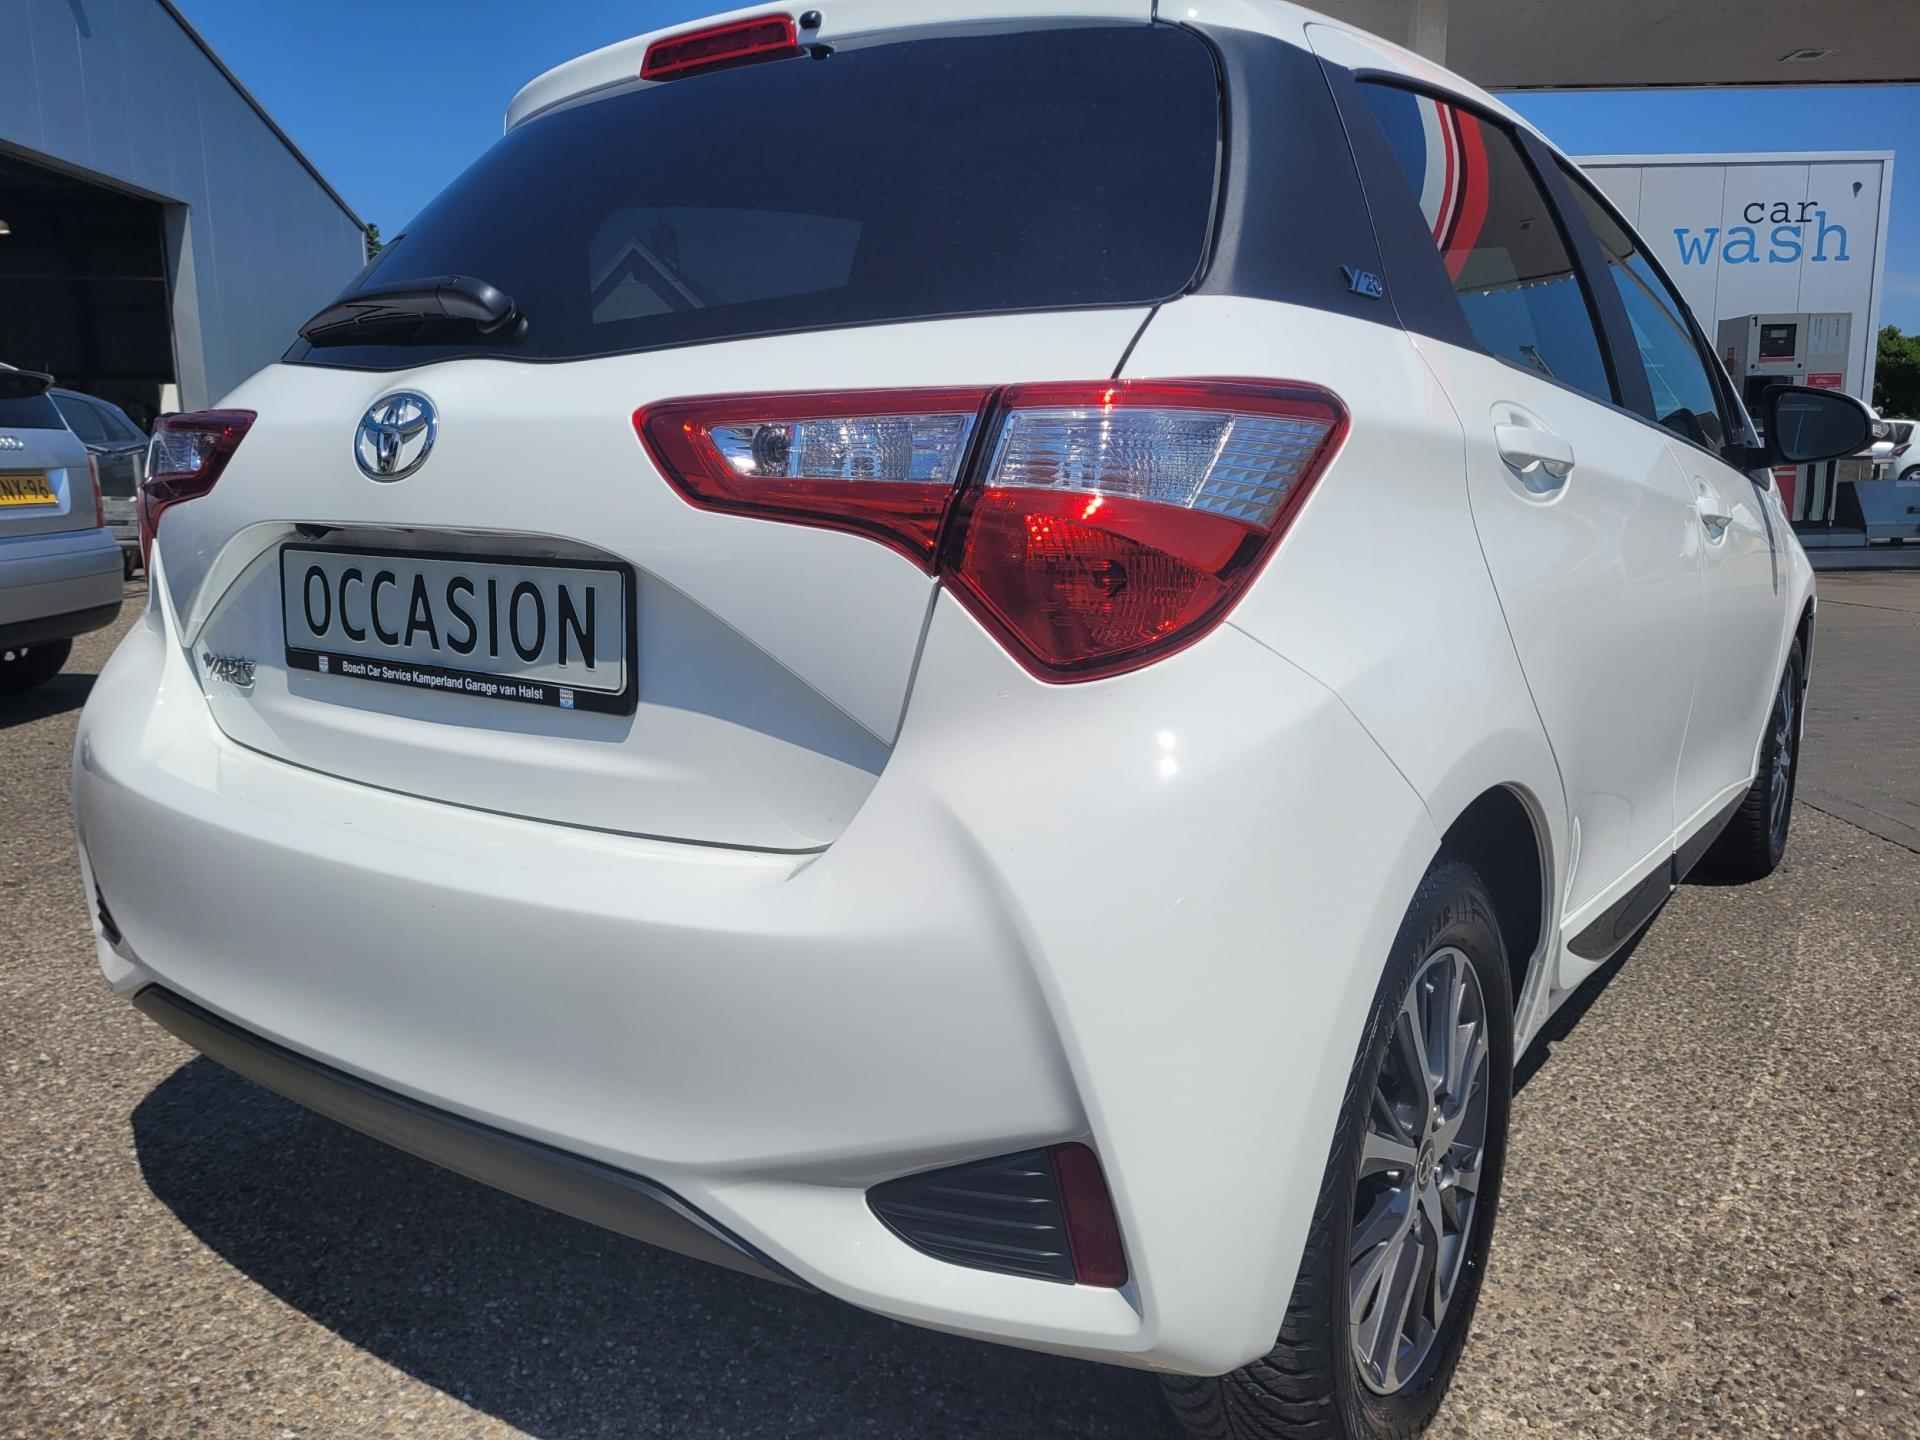 Toyota Yaris 1.5 VVT-i Dynamic Y20 AUTOMAAT / APPLE+ANDROID CAR PLAY / BTW Auto - 14/30